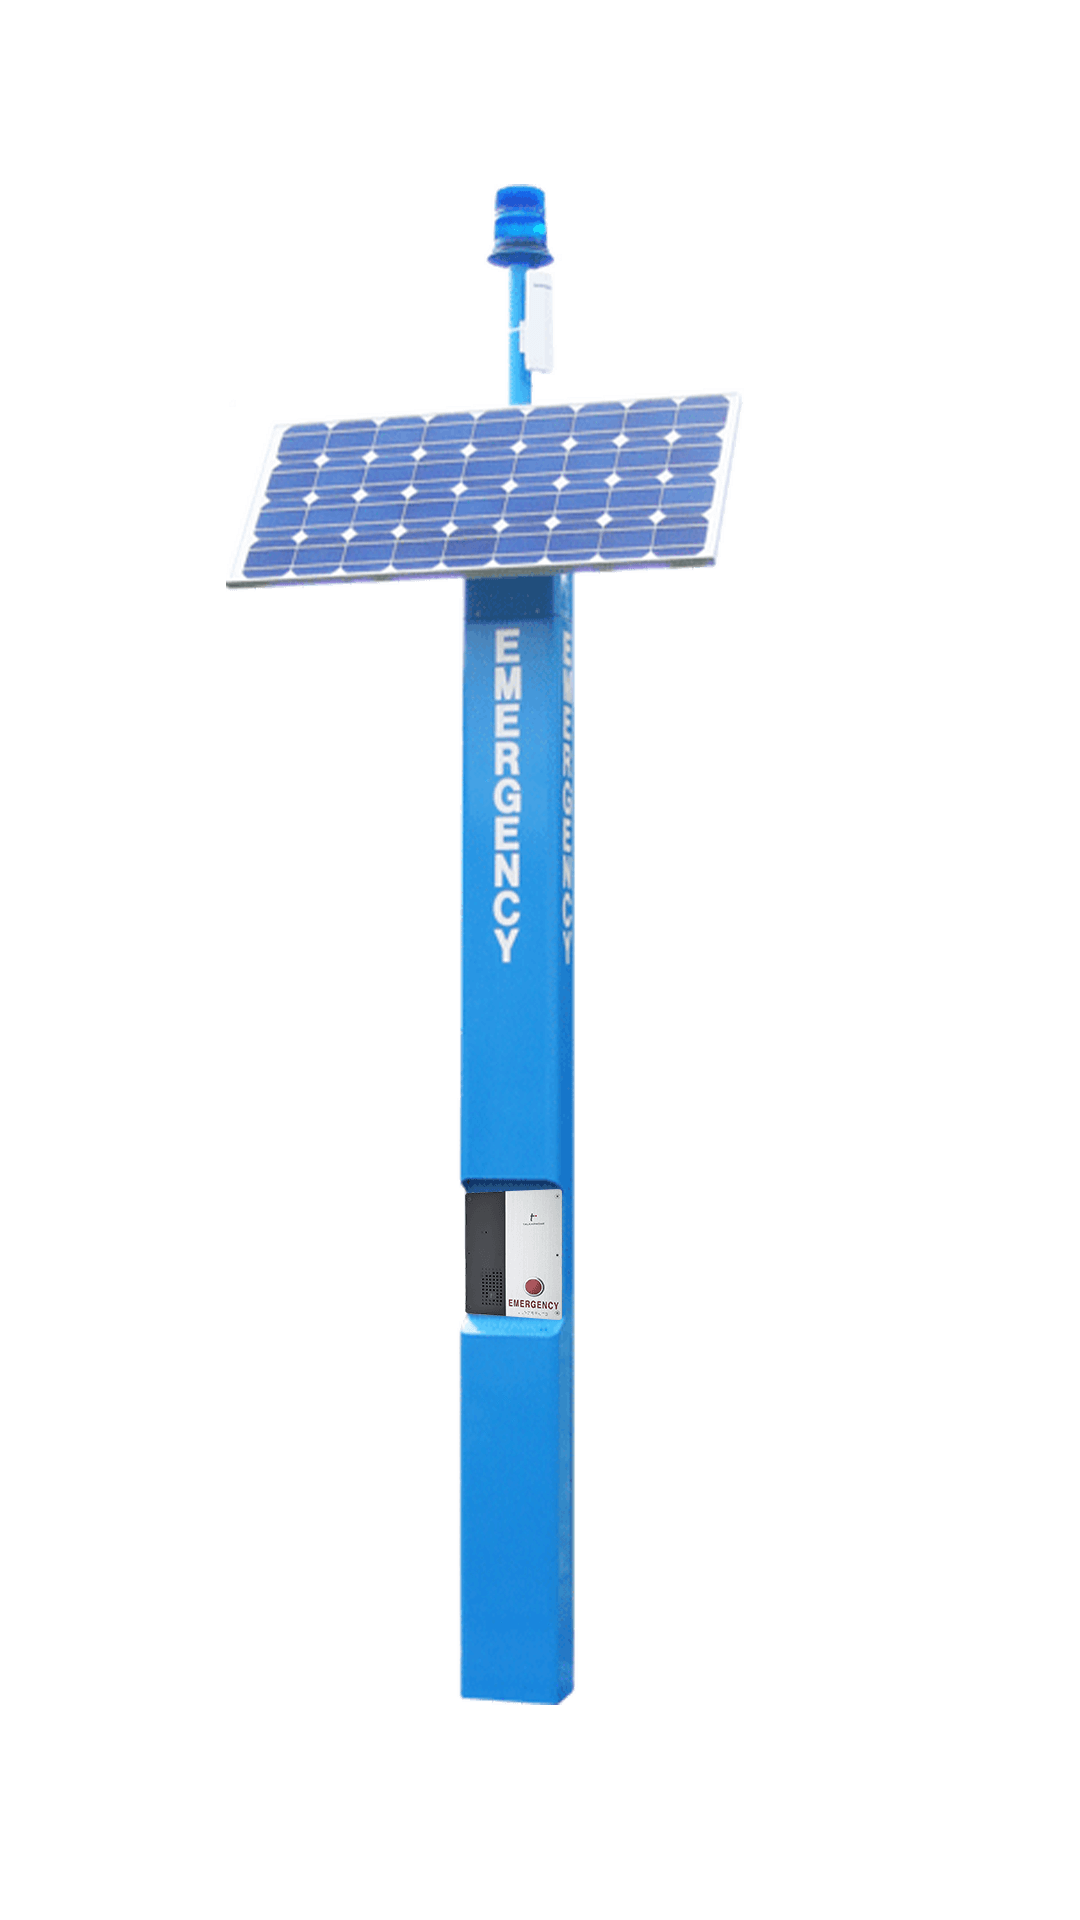 ECO Tower - Aluminum Blue Light Call Station Tower with Support for Pole-mounting Devices